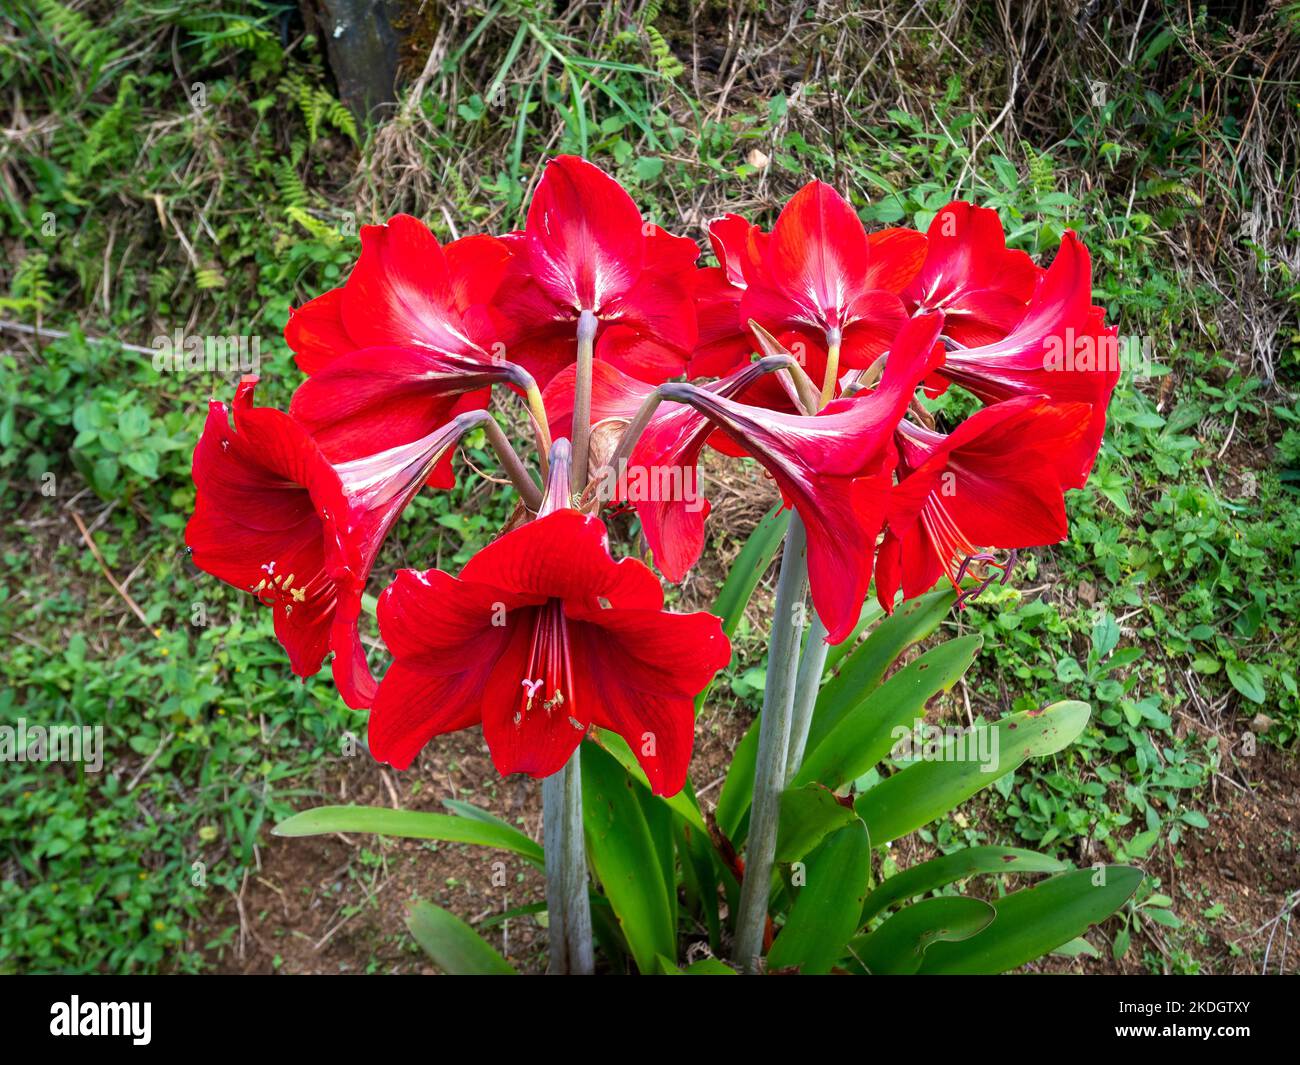 The Red Flower Knows as Striped Barbados Lily (Hippeastrum striatum) is in the Garden Stock Photo